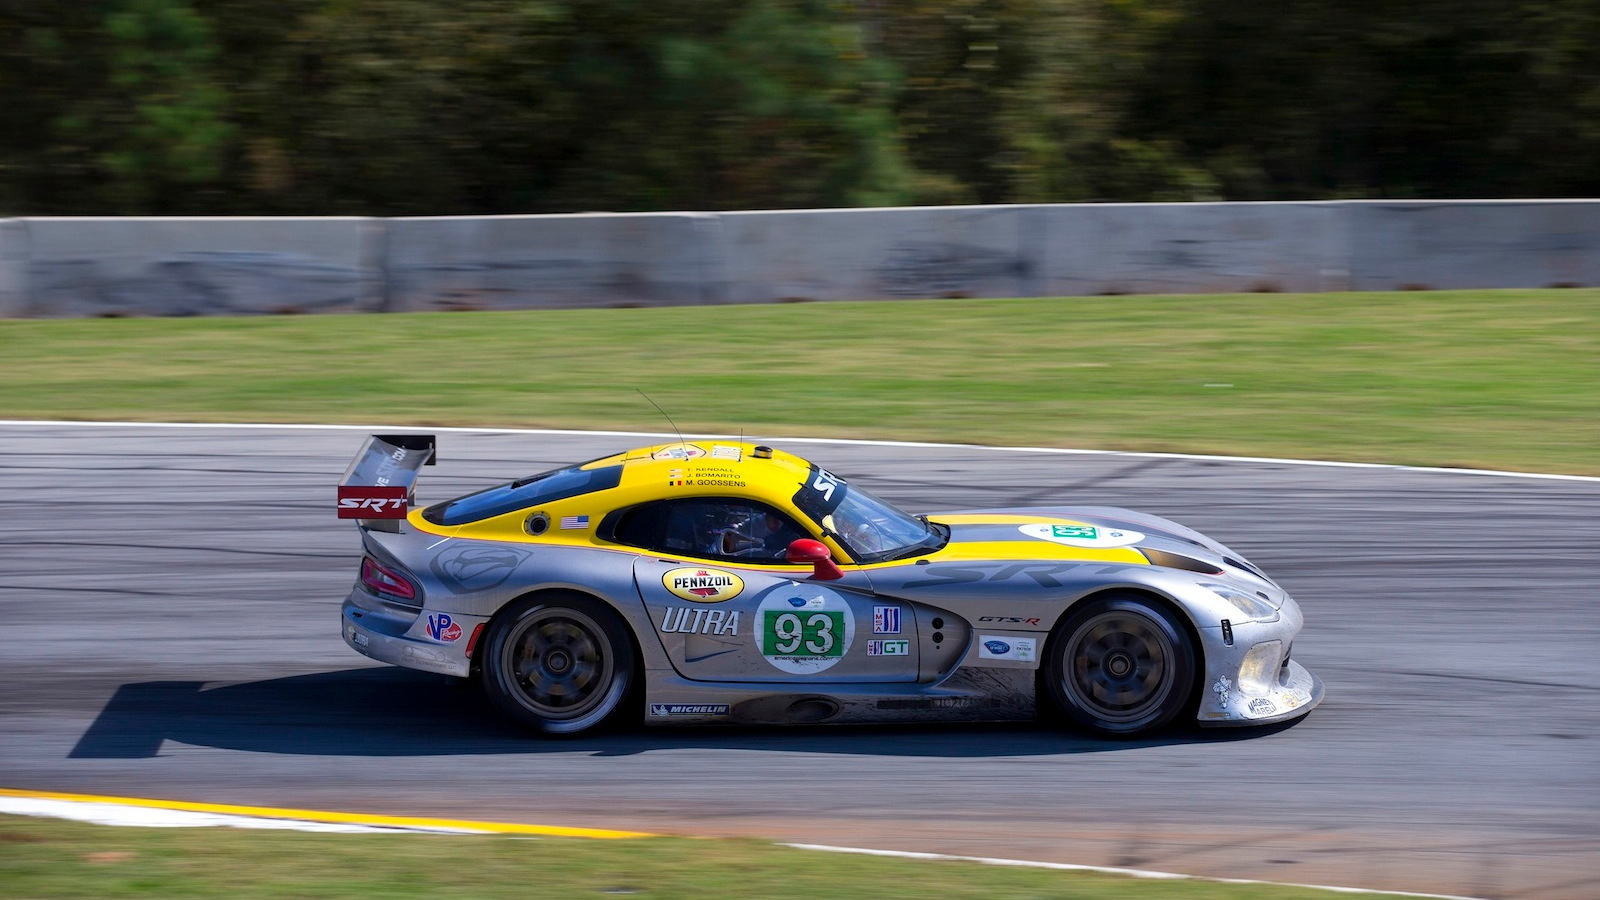 The SRT Viper GTS-R returns to Le Mans in 2013